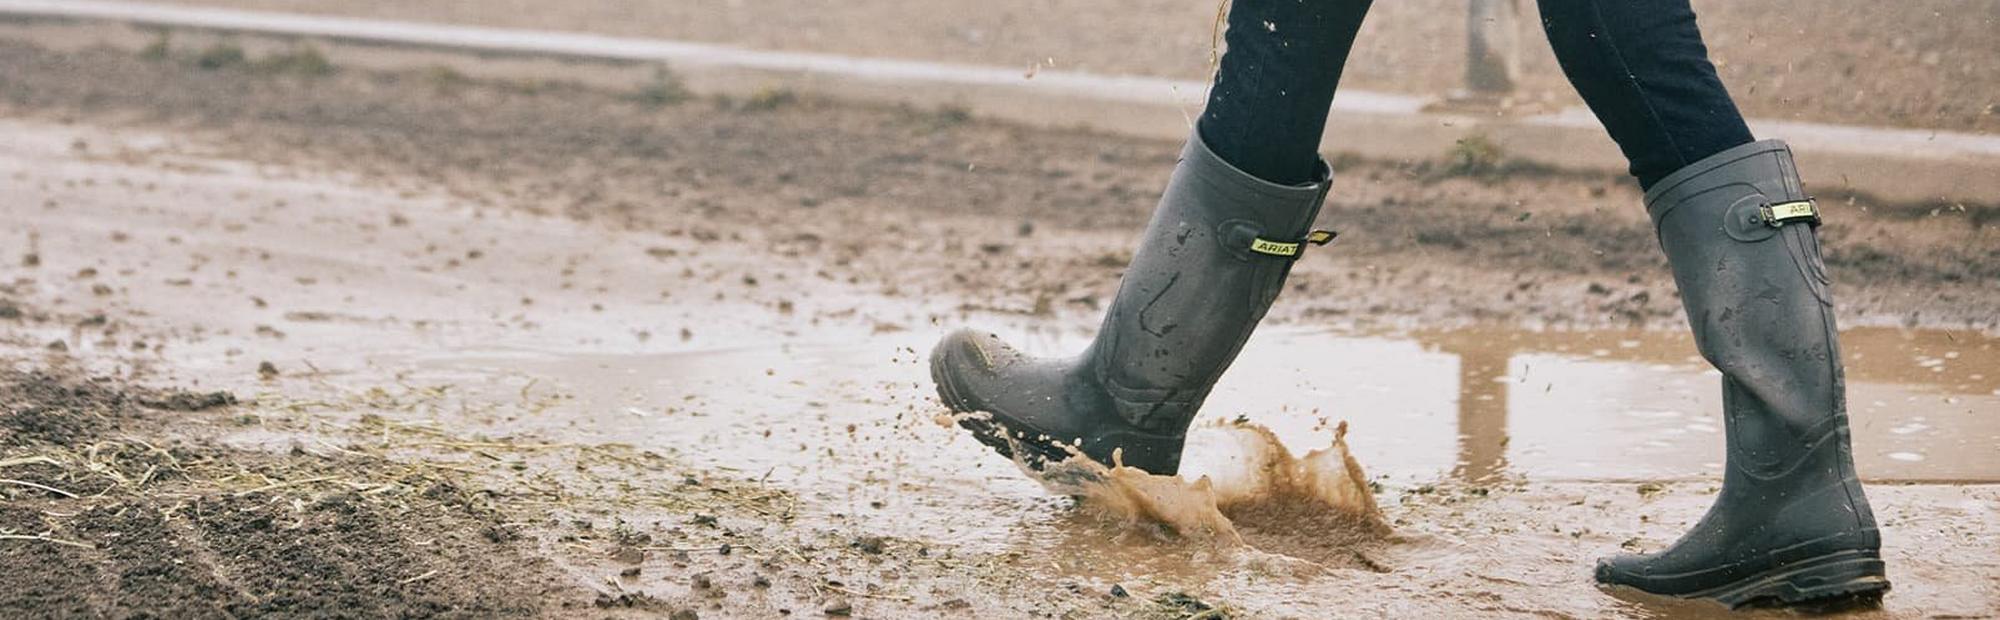 How to Clean Muck Boots